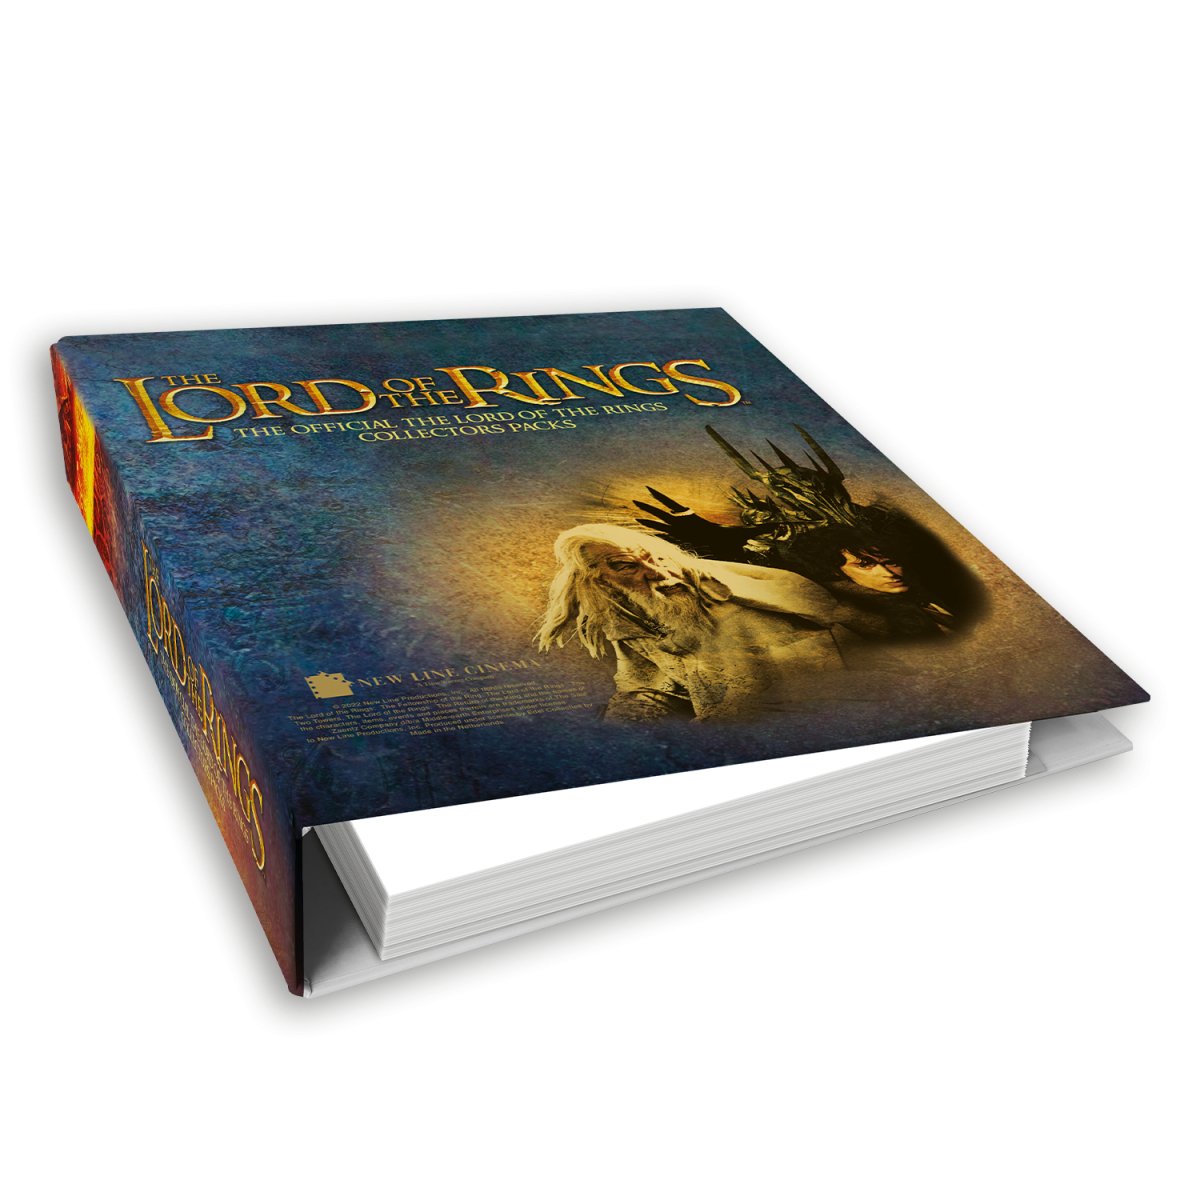 Verzamelalbum “The Official The Lord Of The Rings Collectors Packs” - Edel Collecties